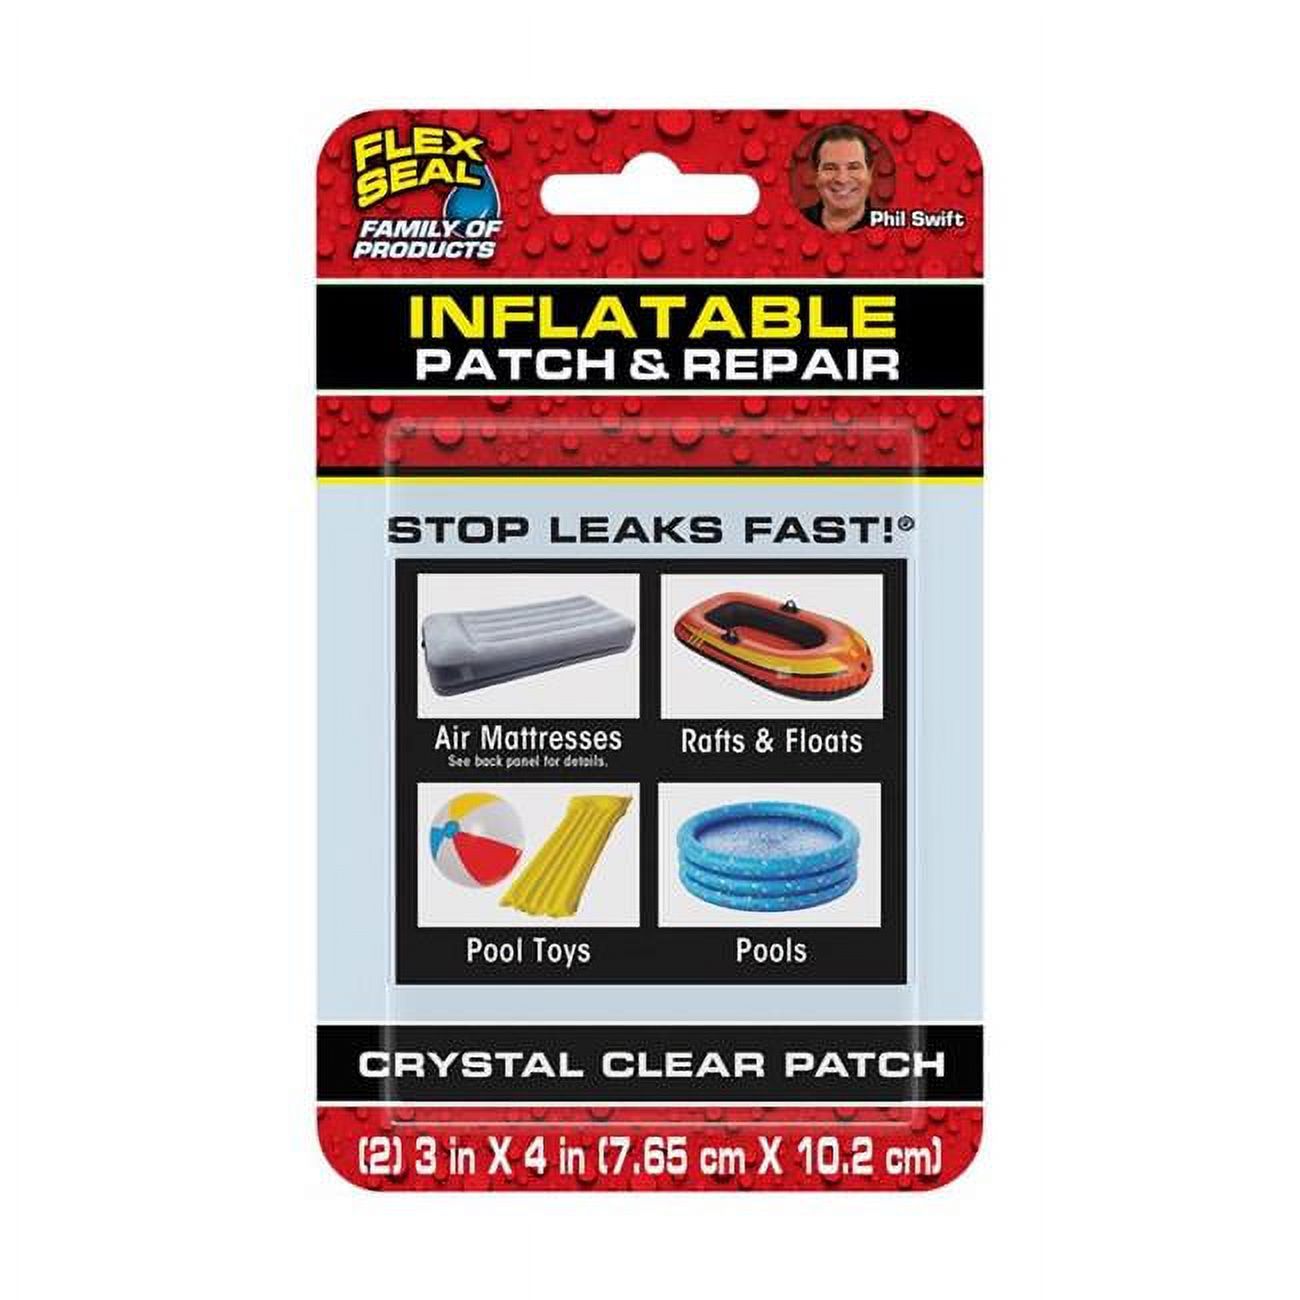 Flex Seal Family  3 x 4 in. Fast Inflatable Patch & Repair Kit, Clear - Pack of 2 - image 1 of 2